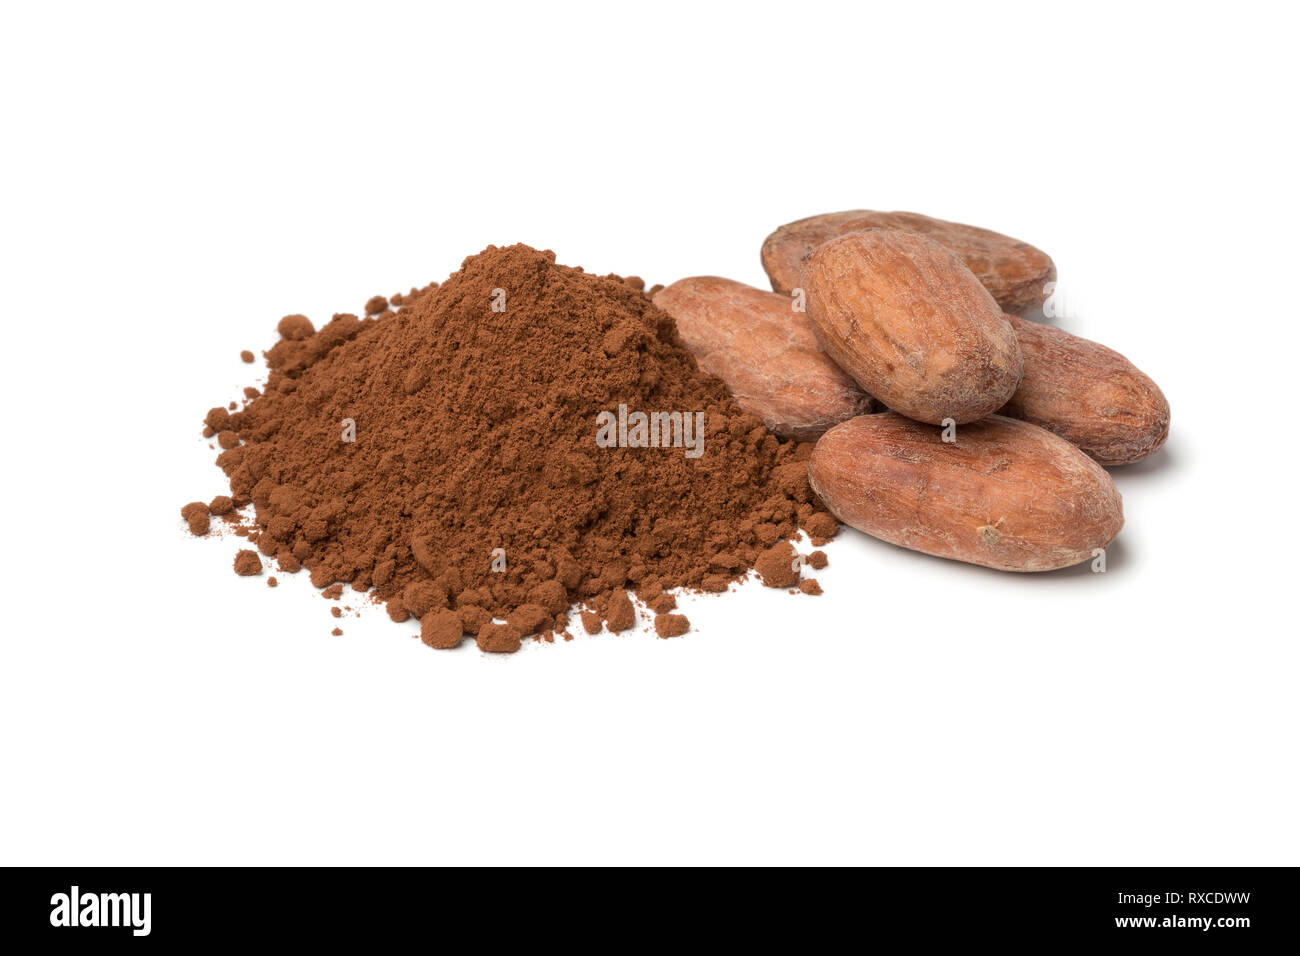 Heap of whole cocoa beans and cocoa powder isolated on white background Stock Photo